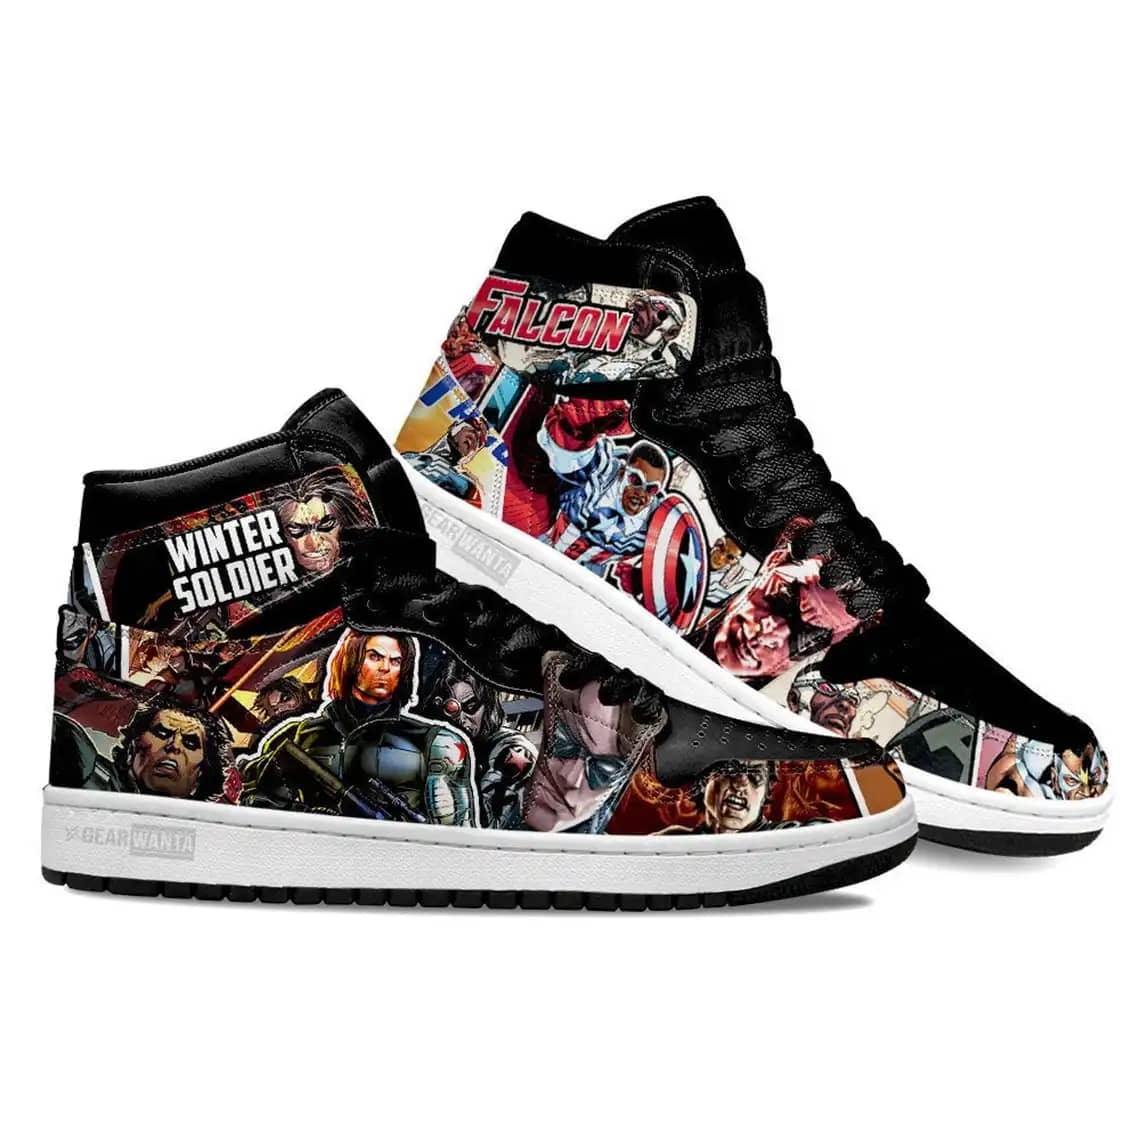 Avenger Falcon And Winter Soldier Super Heroes For Movie Fans - Custom Anime Sneaker For Men And Women Air Jordan Shoes